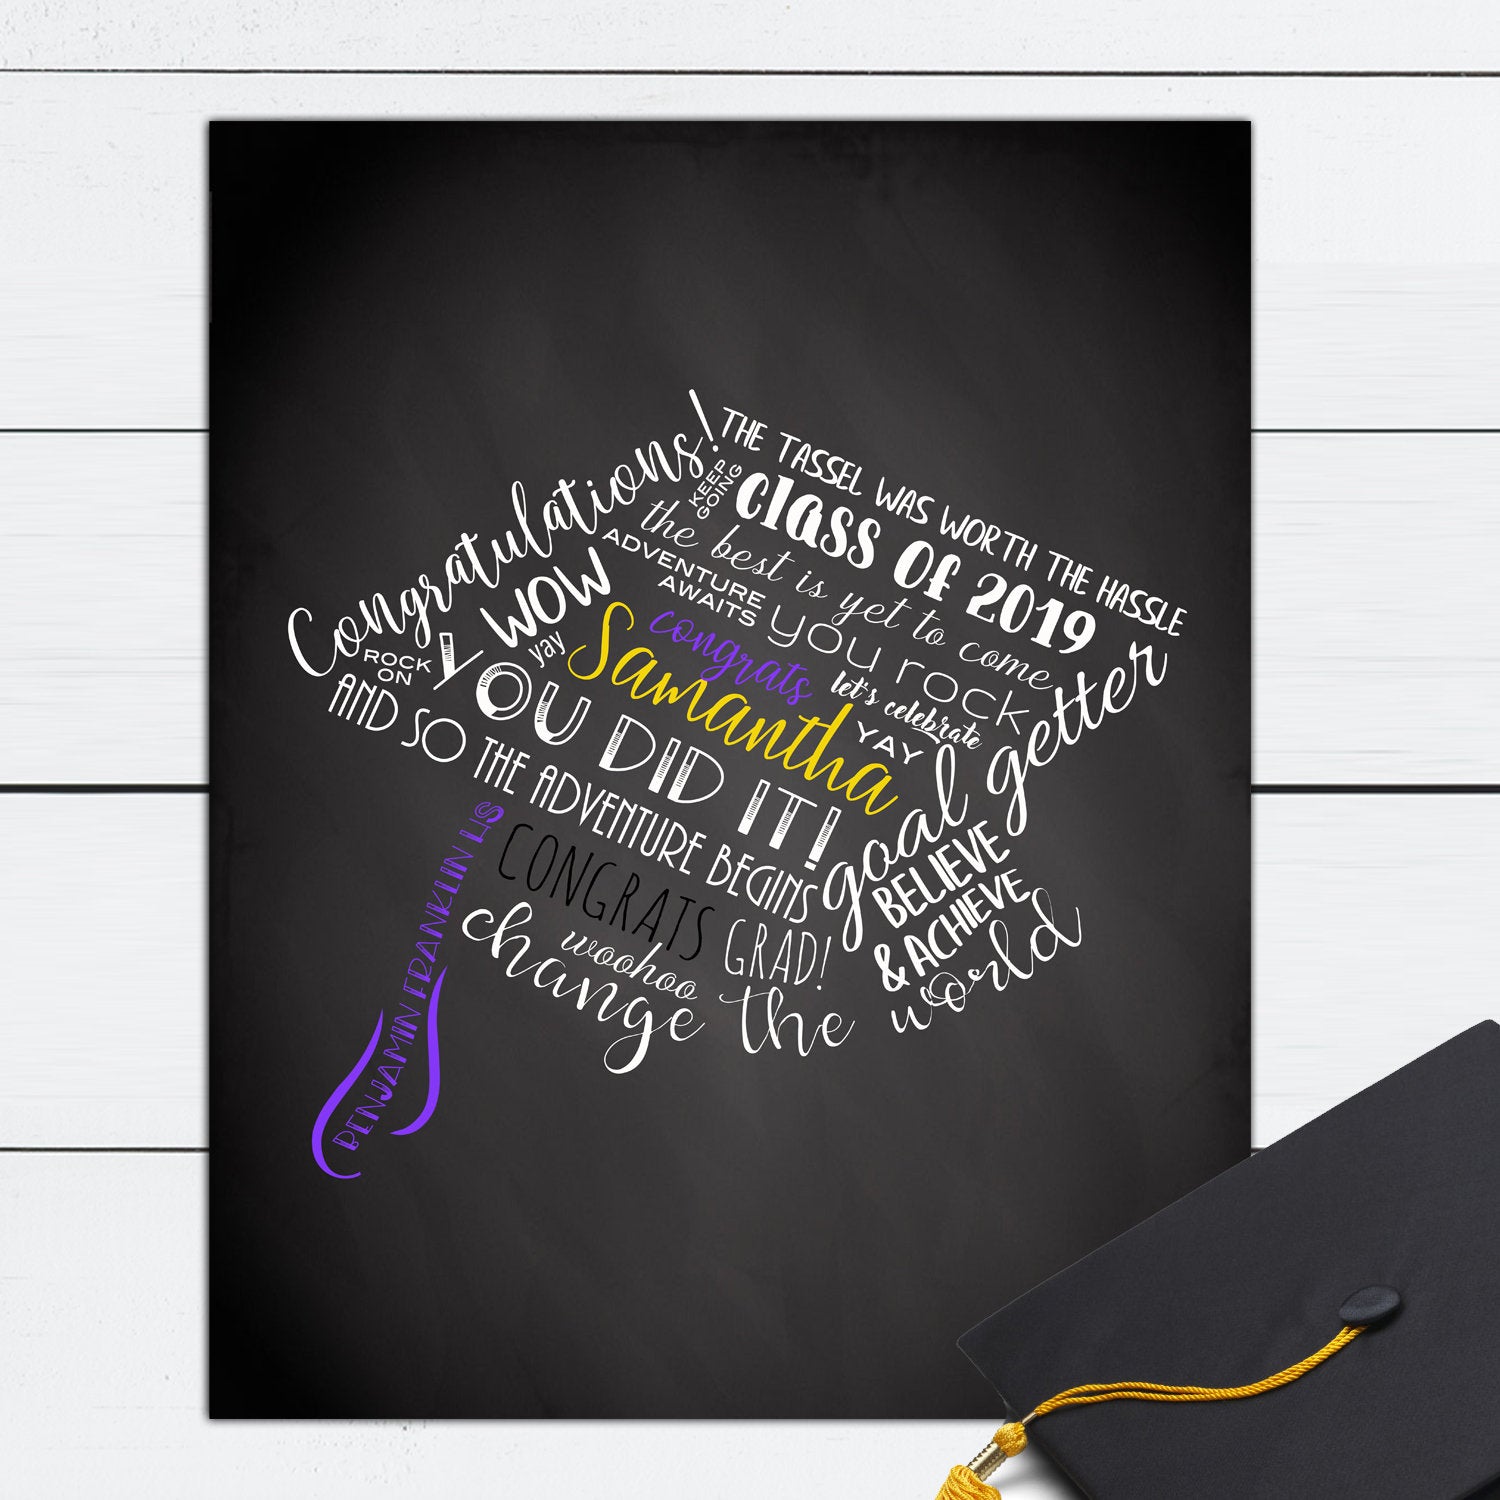 Personalized Graduation Gift for Her, Personalized Graduation Gift, Personalized Graduation Cap, Grad Gift Box, High School, College, Grad